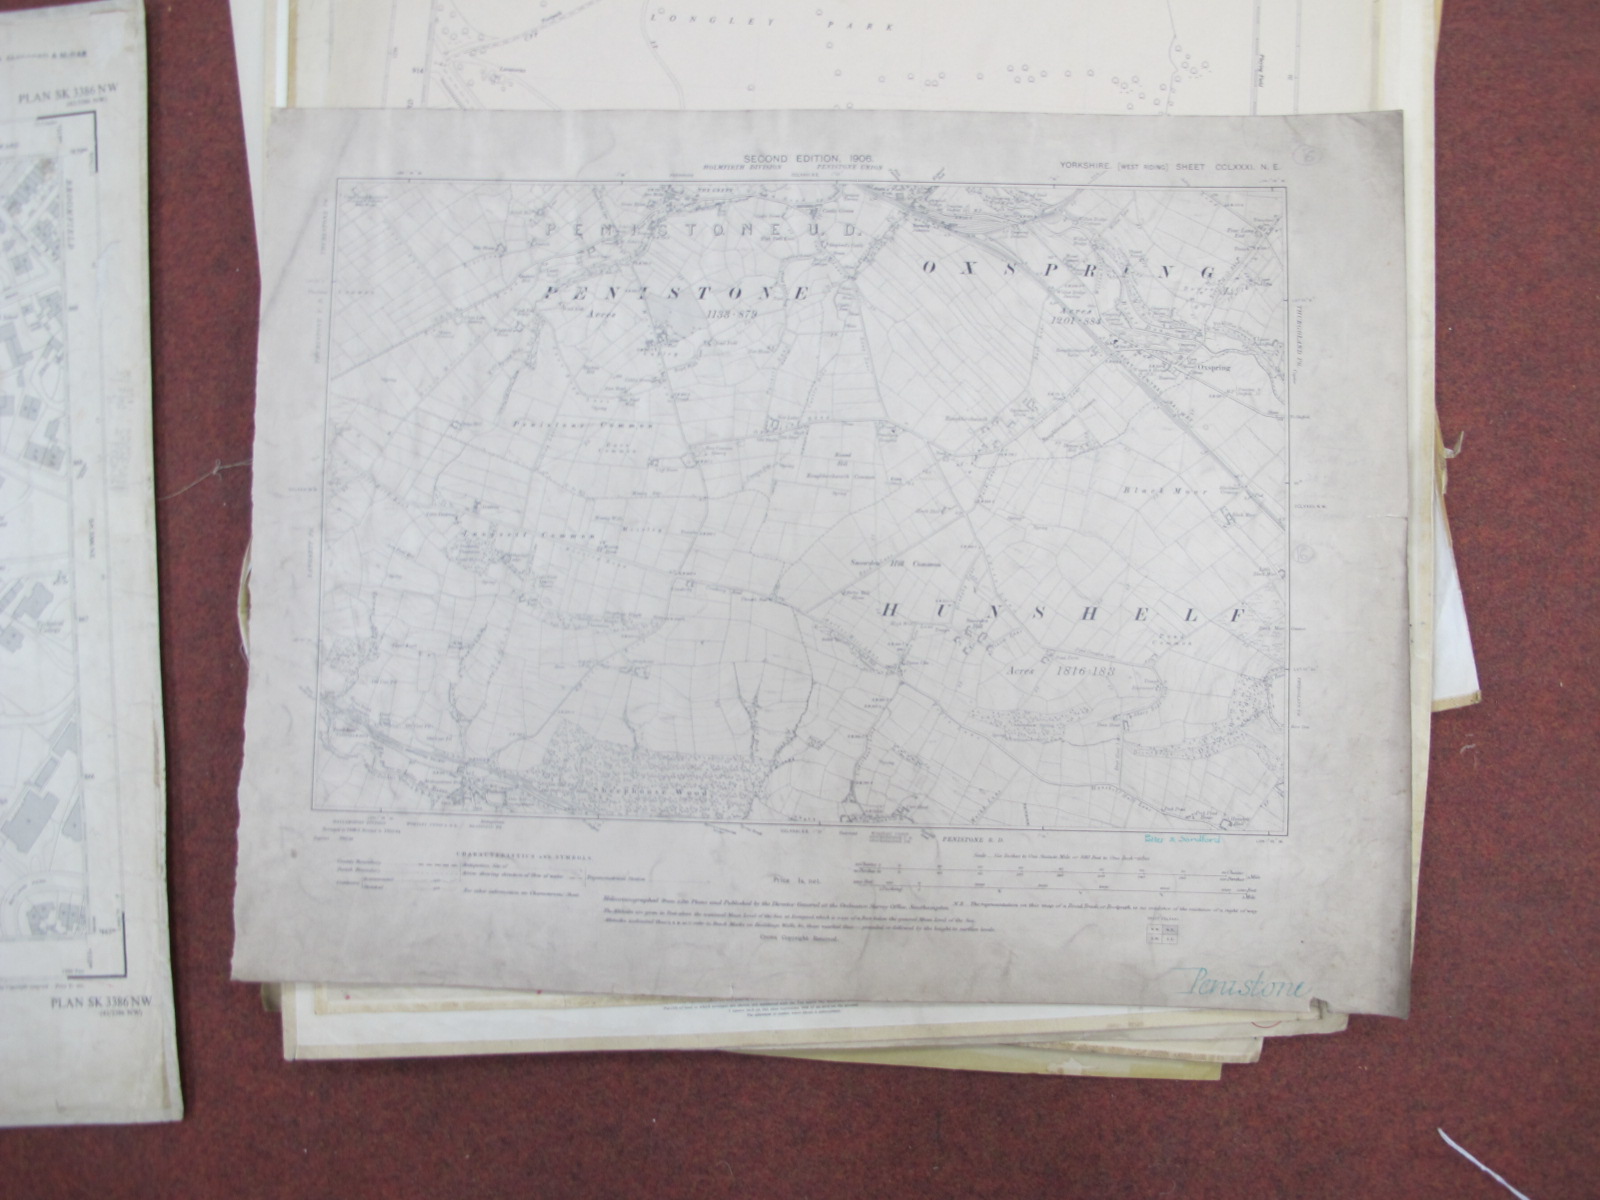 West Riding Yorkshire Maps, Sheffield Central, North, Penistone, Broomhill, Crookesmoor, - Image 2 of 10